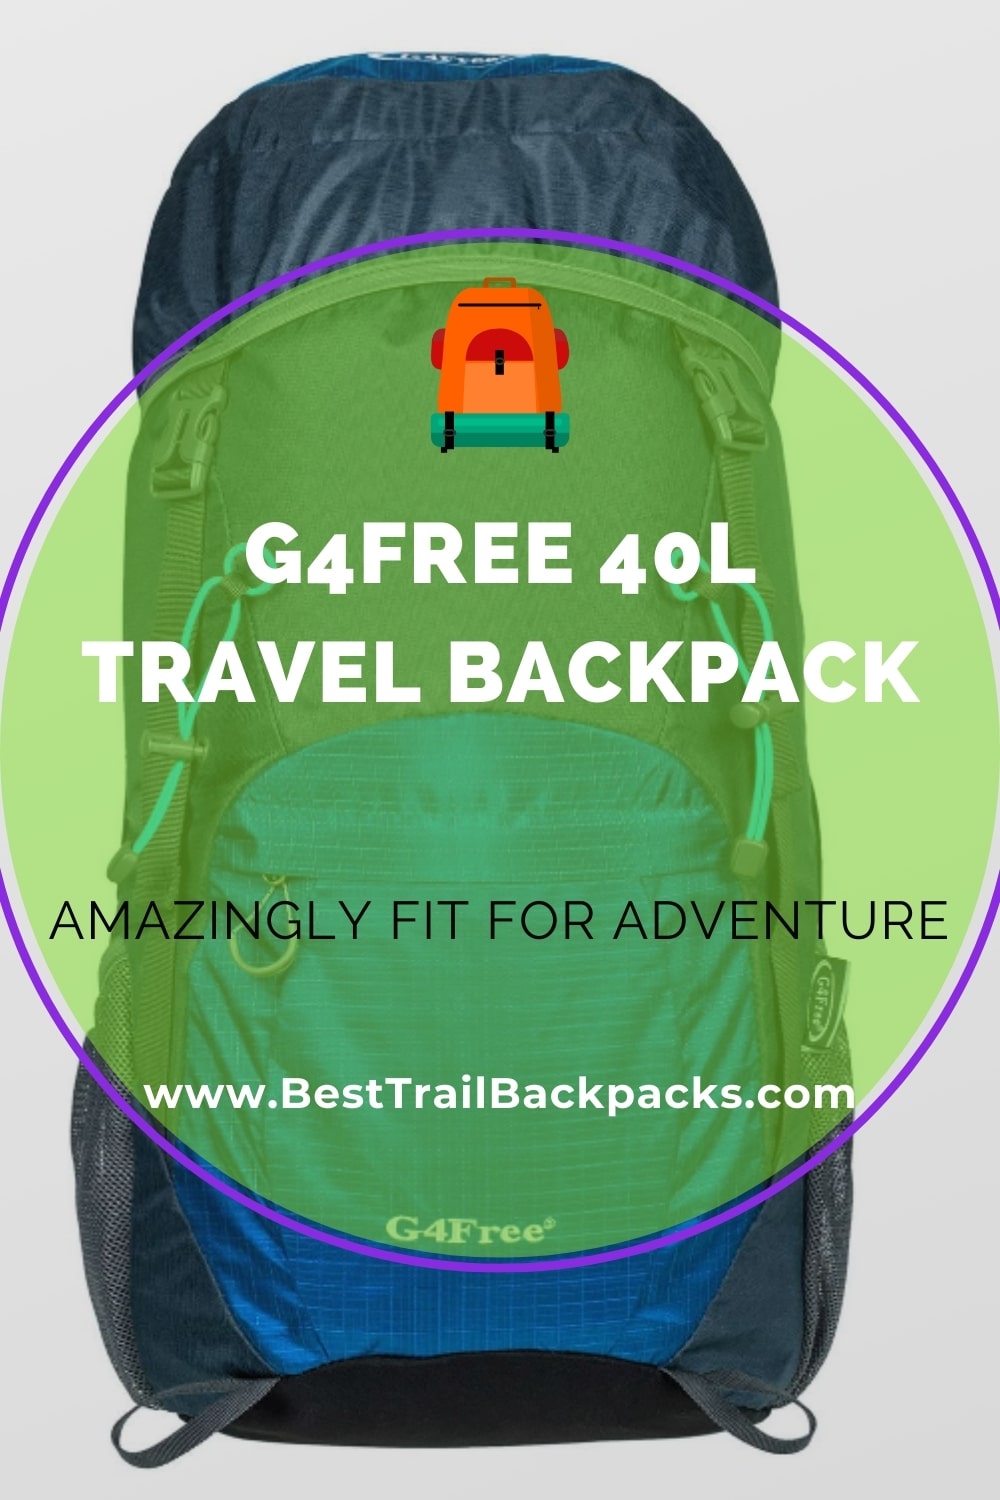 G4Free Travel Backpack Review - Front View